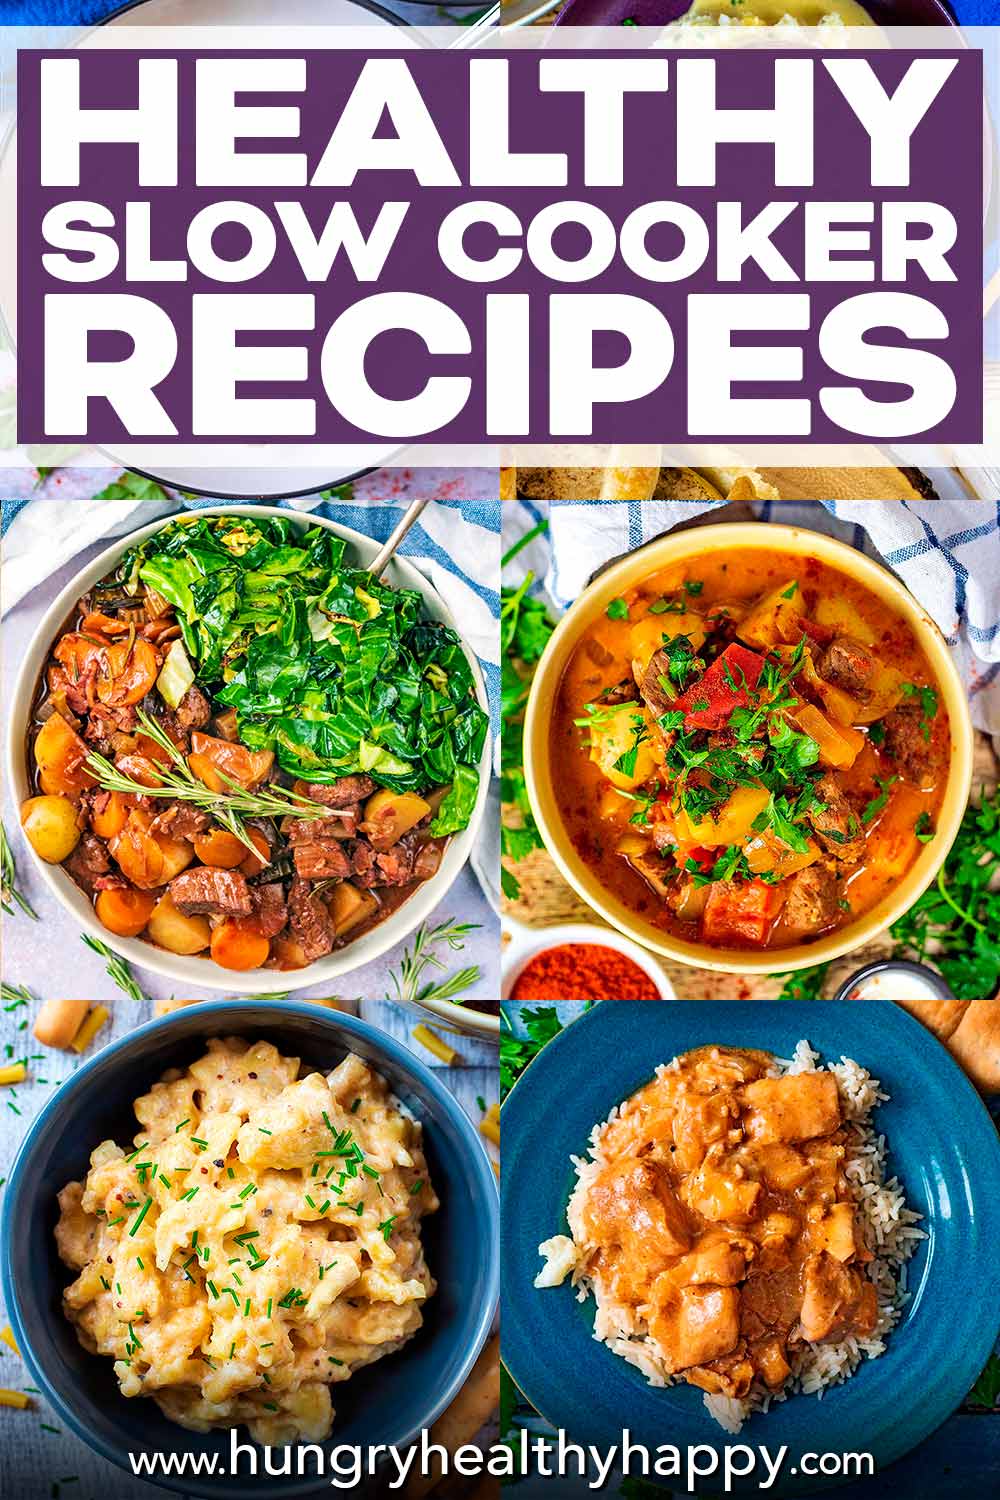 35 Healthy Slow Cooker Recipes - Hungry Healthy Happy